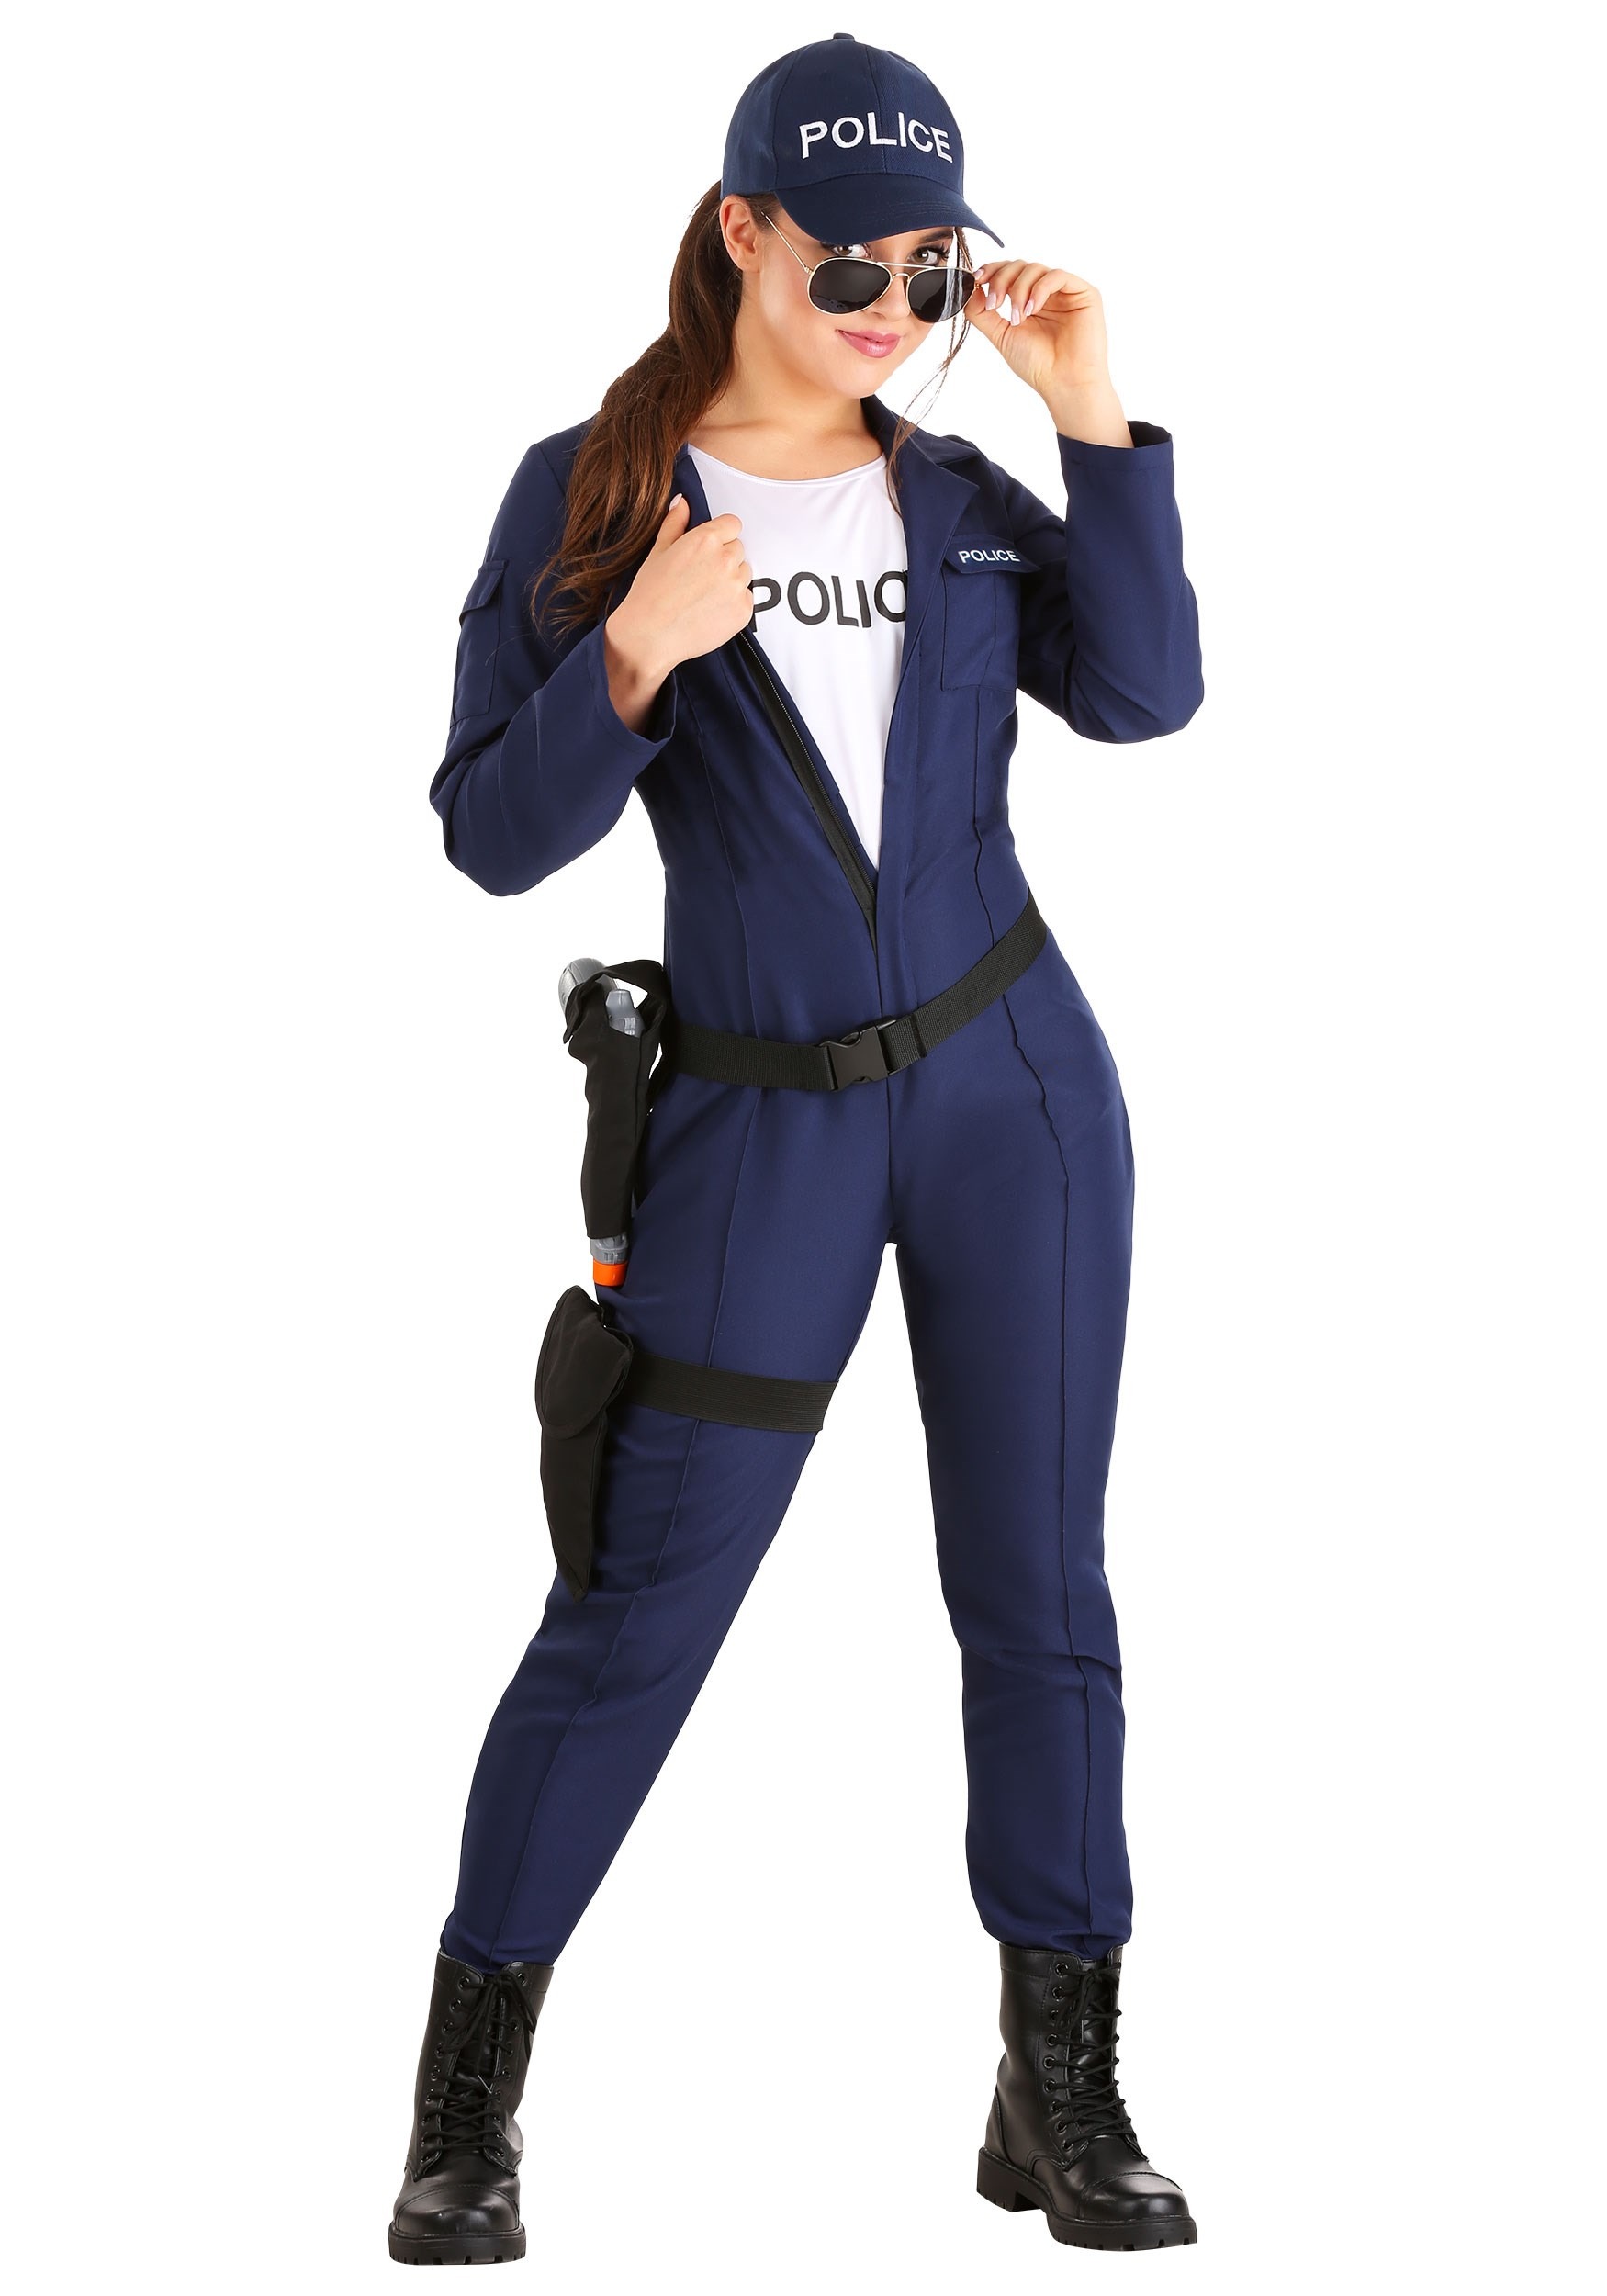 Police Costume Accessories For Women